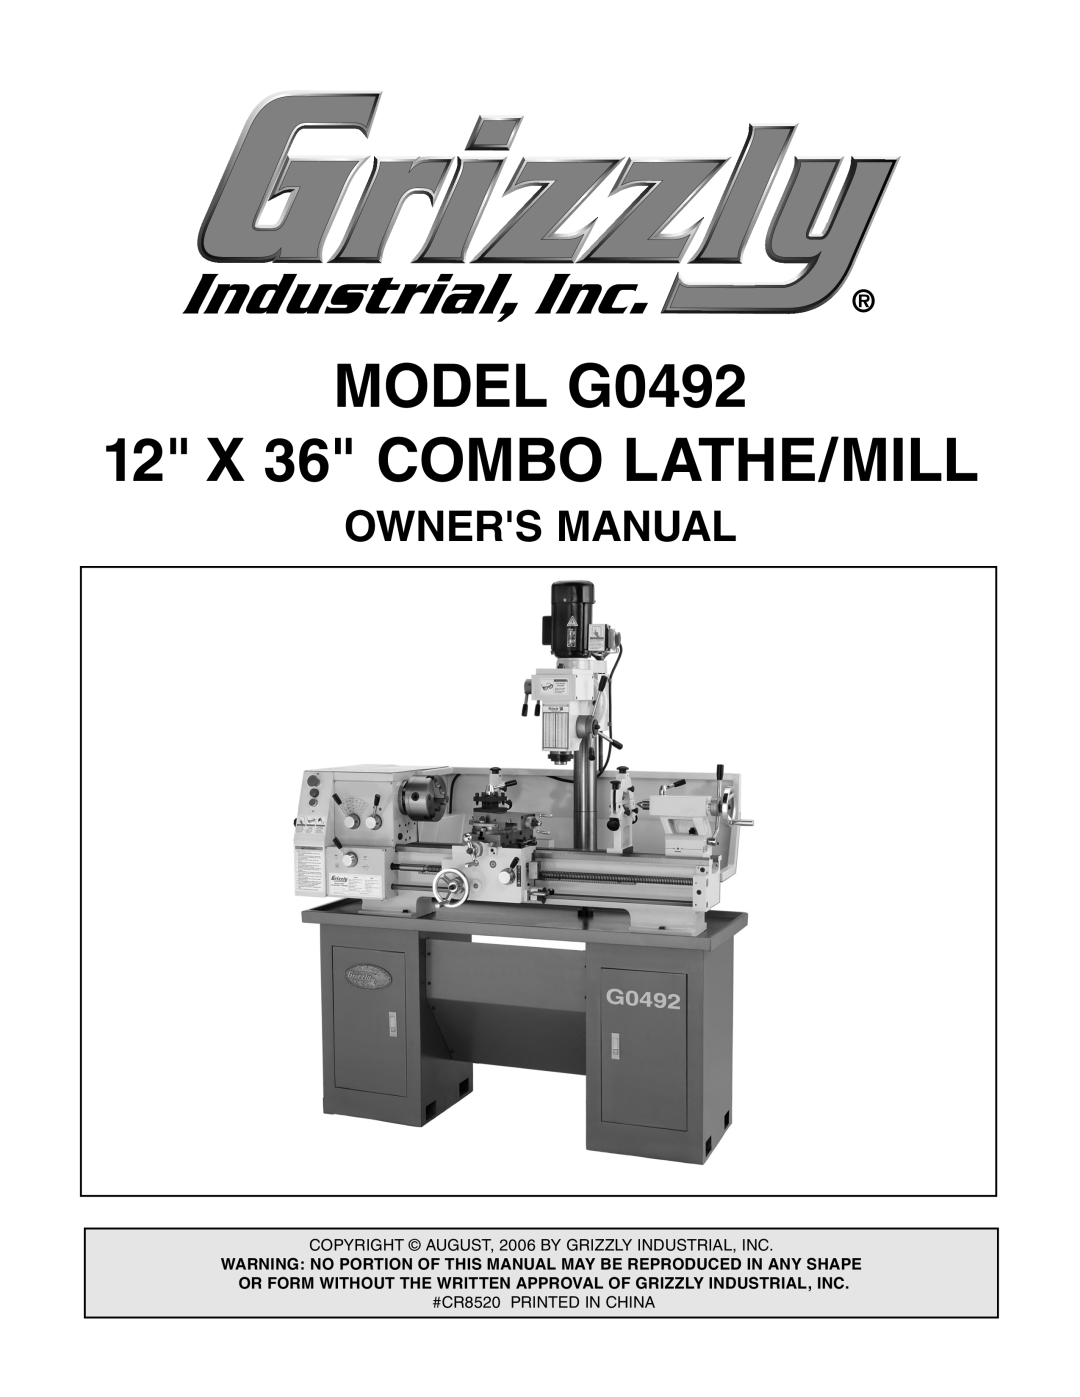 Grizzly owner manual Owners Manual, MODEL G0492 12 X 36 COMBO LATHE/MILL 